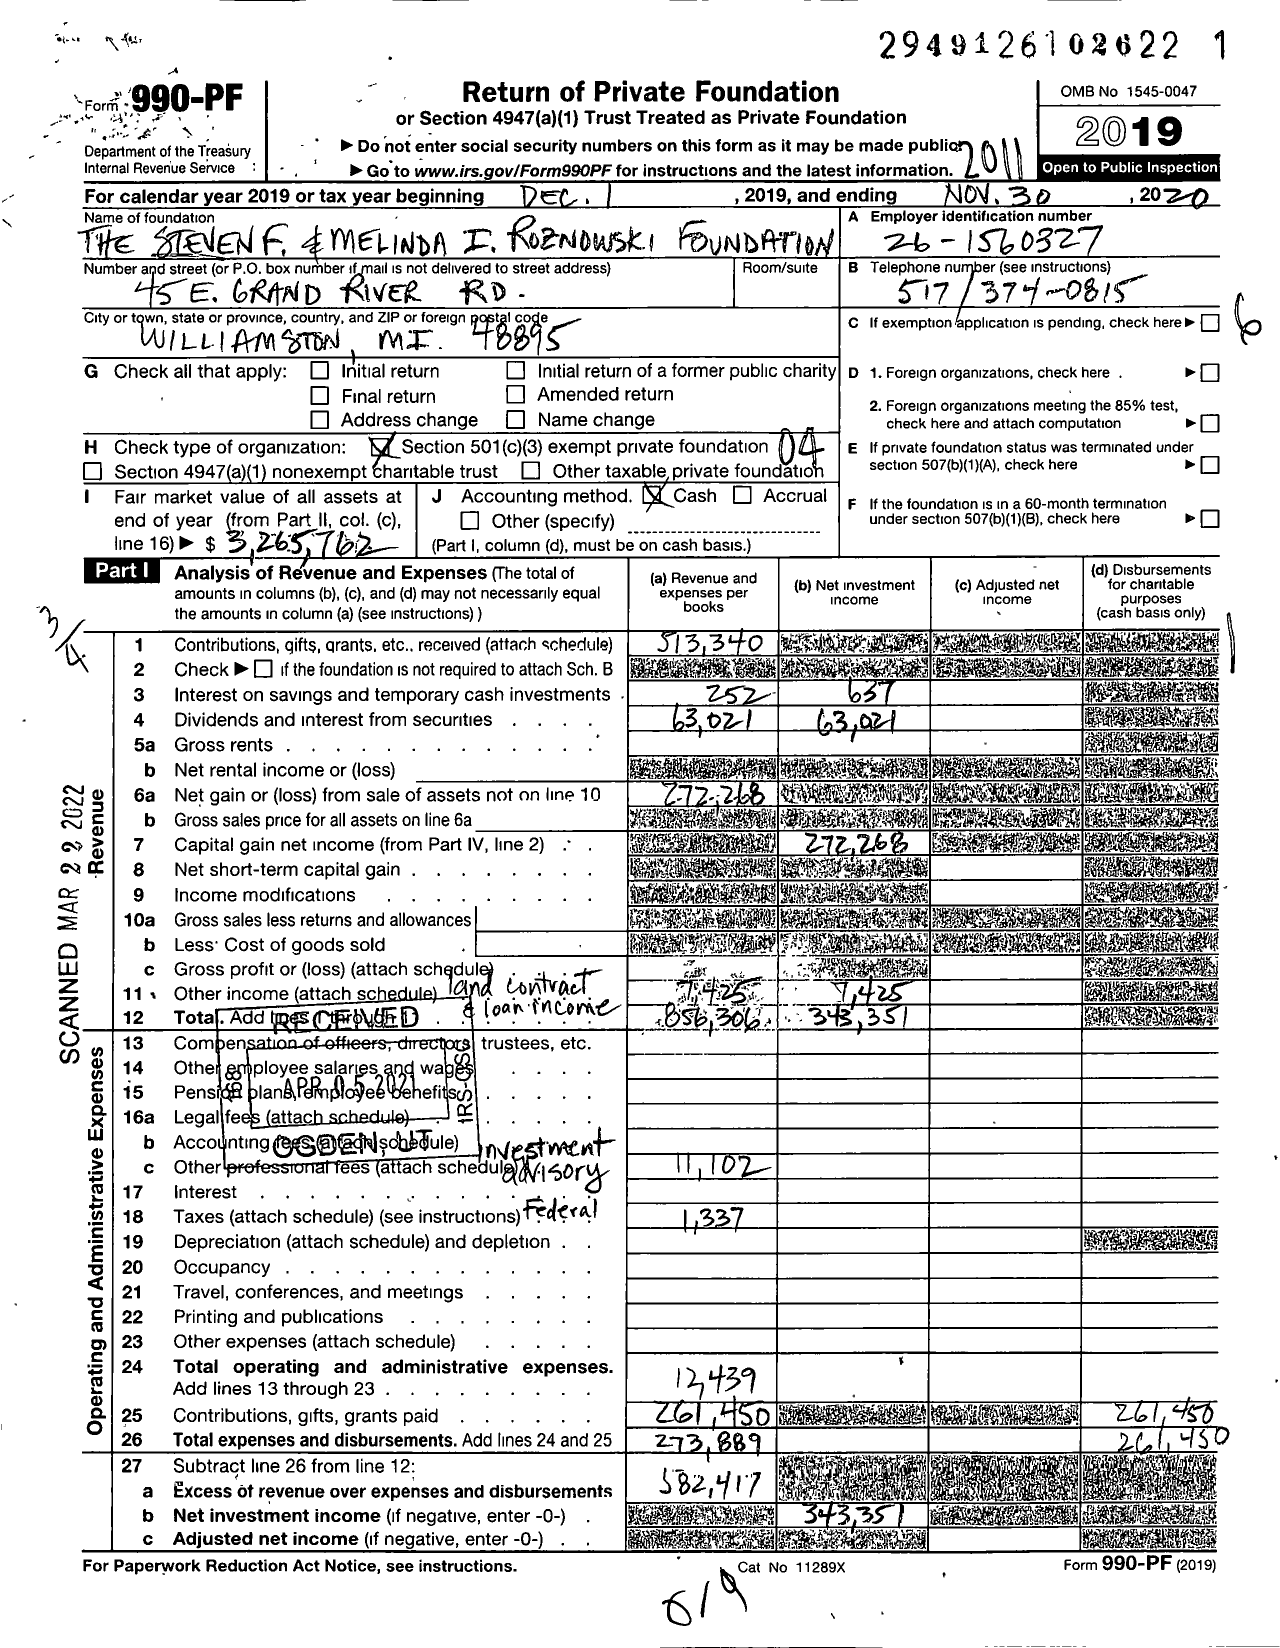 Image of first page of 2019 Form 990PF for The Steven F and Melinda I Roznowski Foundation